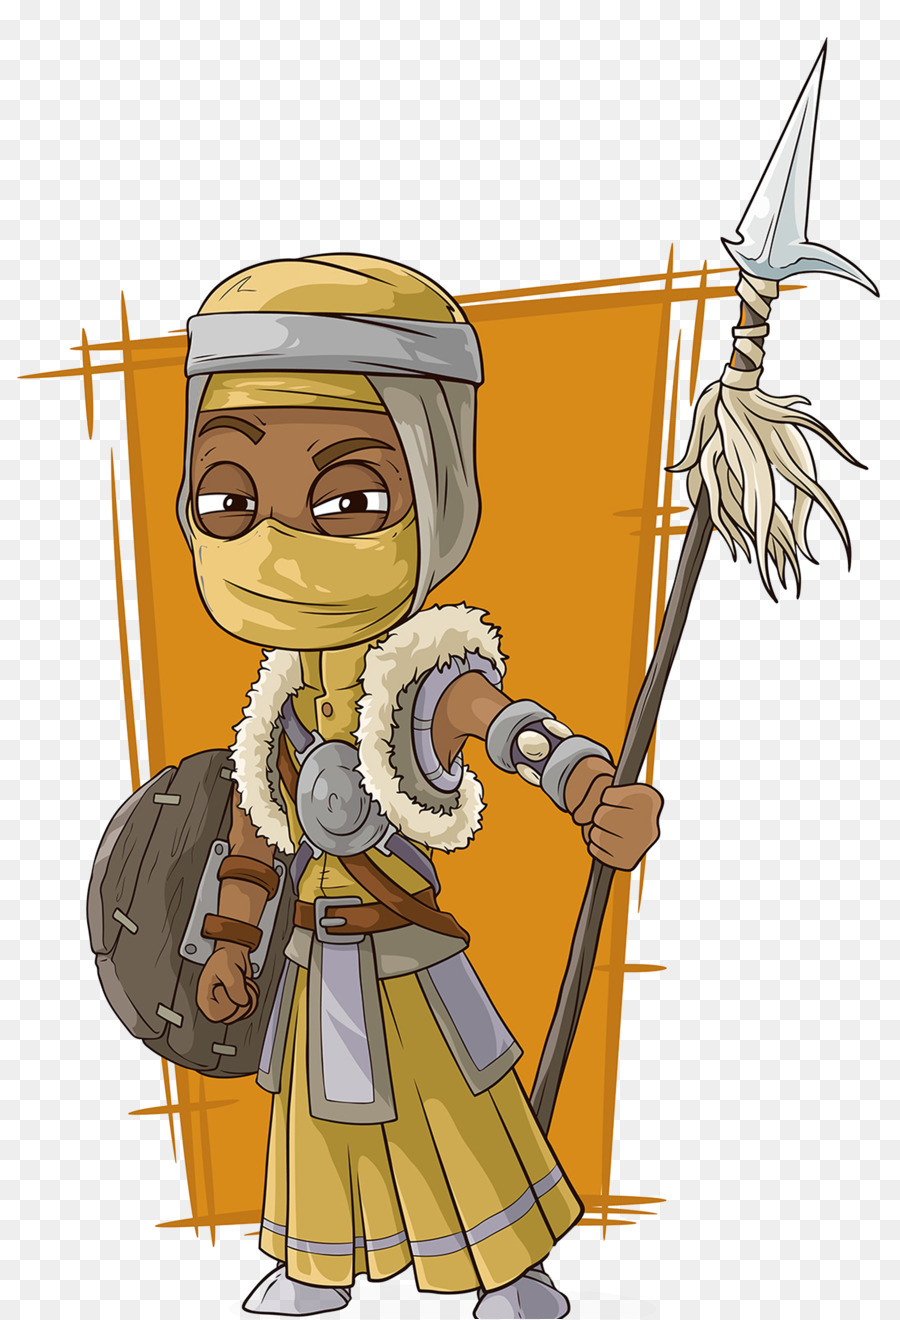 Cartoon Royalty-free Photography Illustration - arab soldiers with weapons png download - 1774*2600 - Free Transparent  Cartoon png Download.